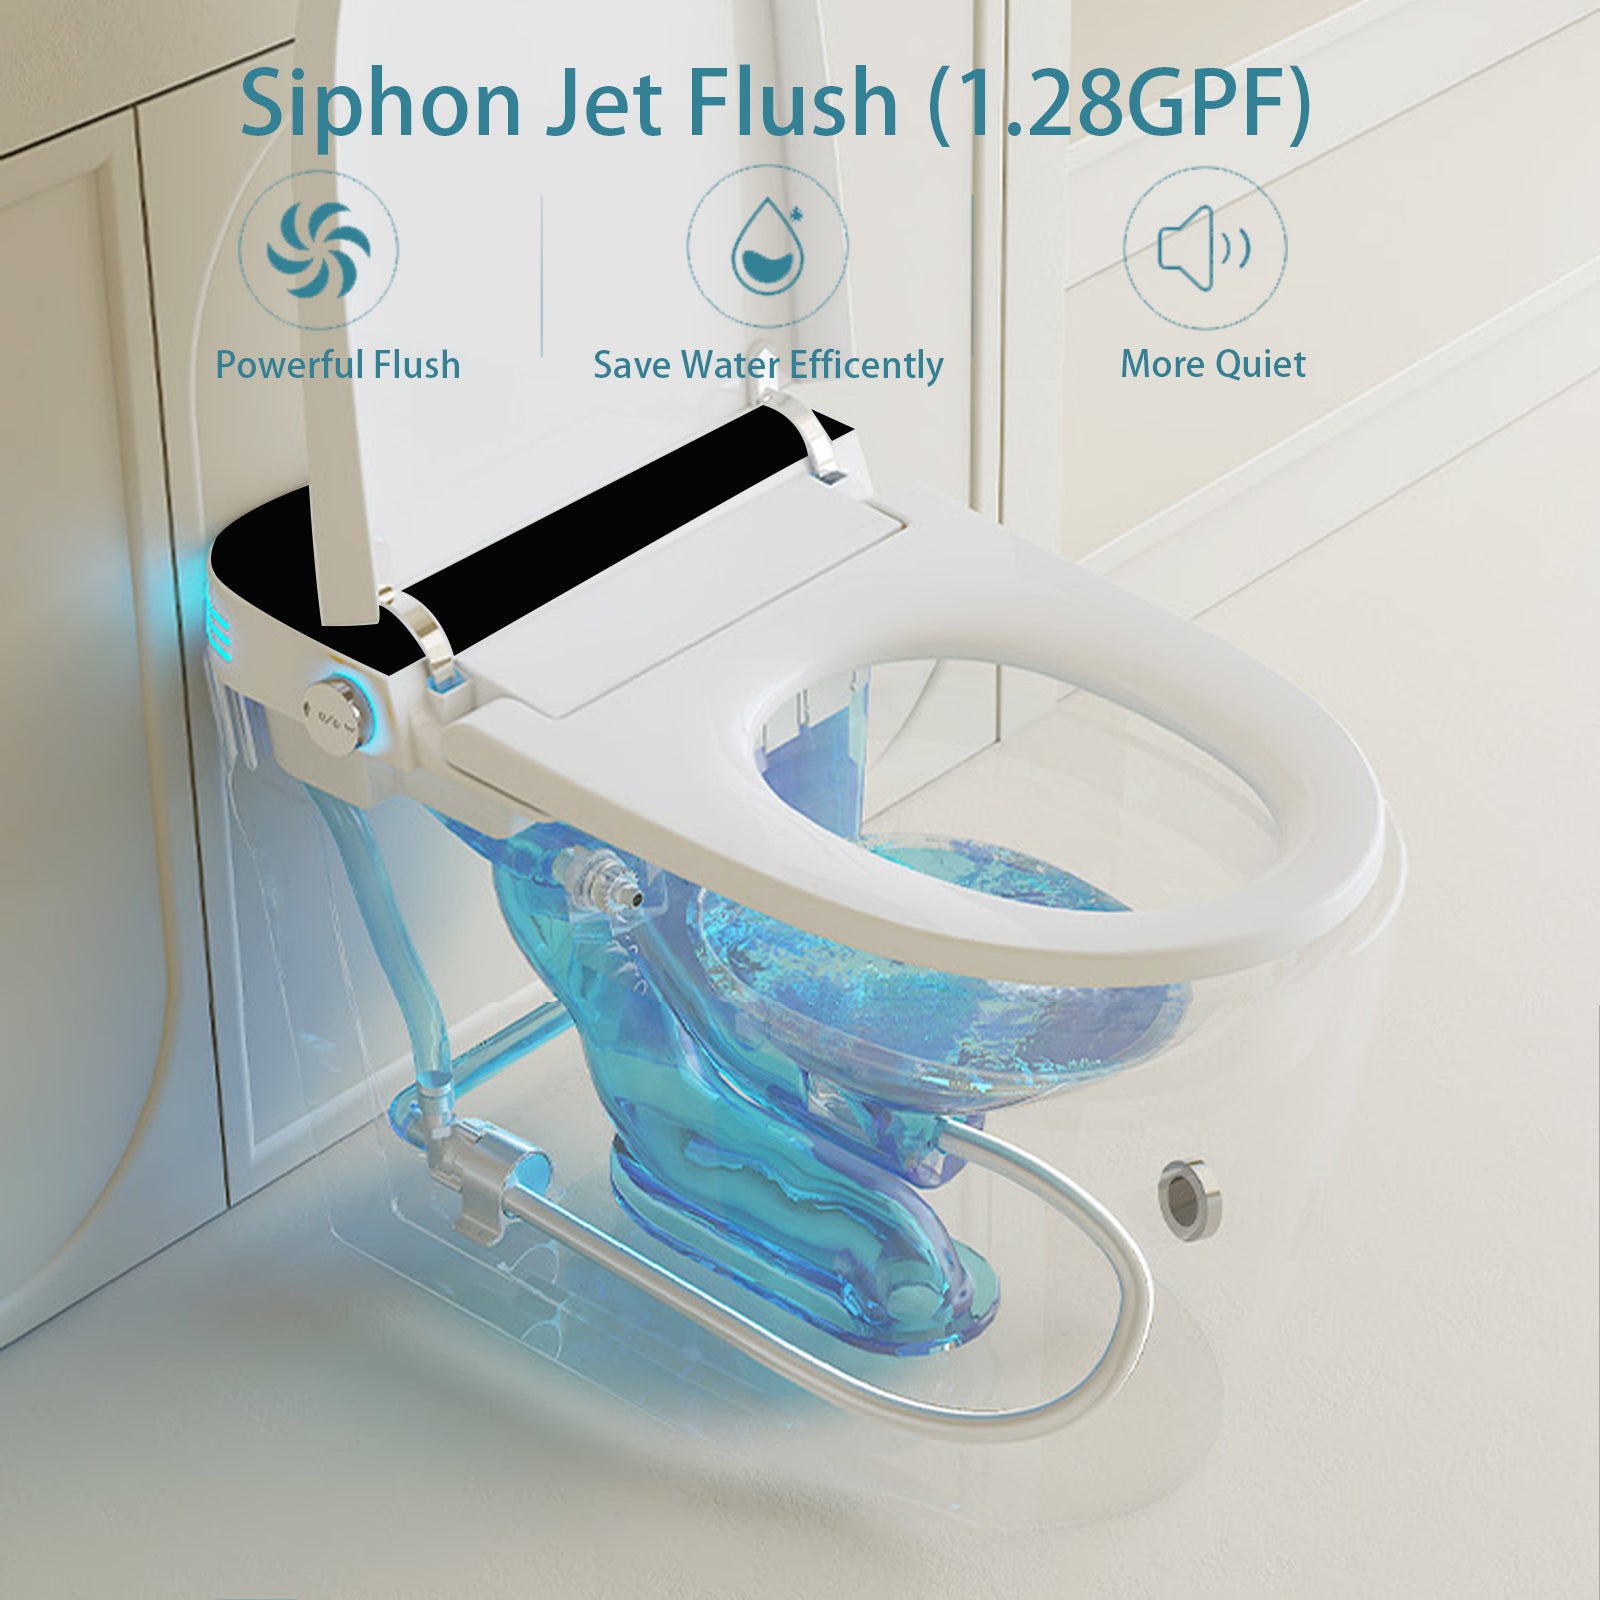 Smart Toilet With Heated Bidet Seat, One Piece